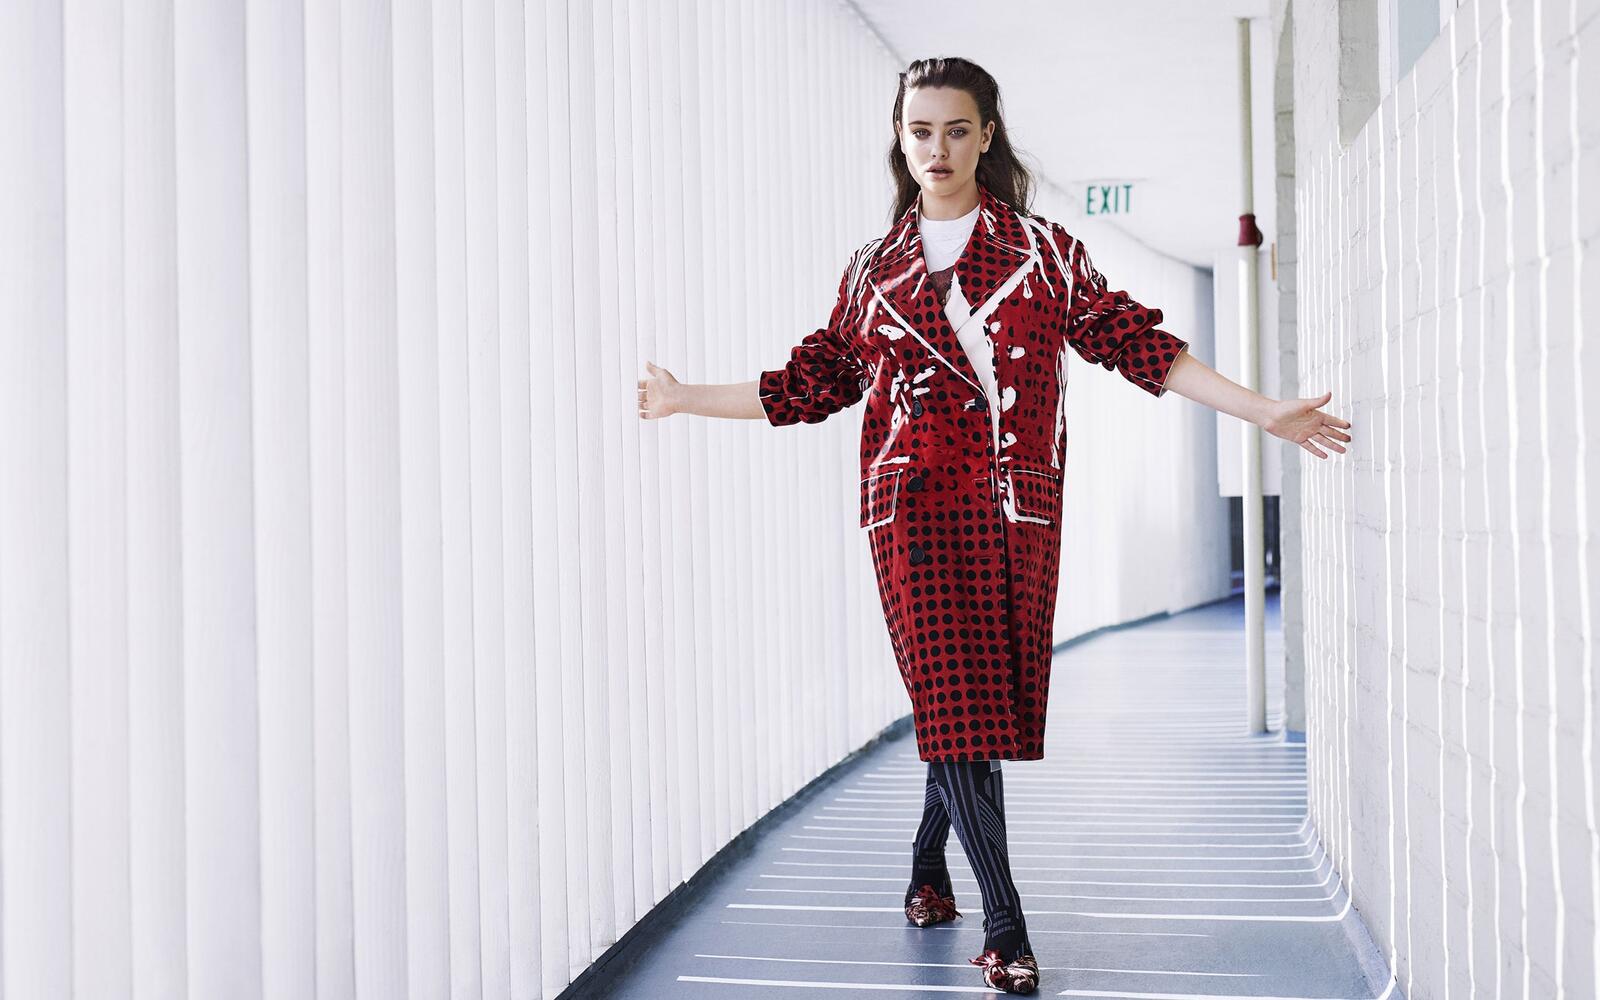 Free photo Katherine Langford in a red coat.